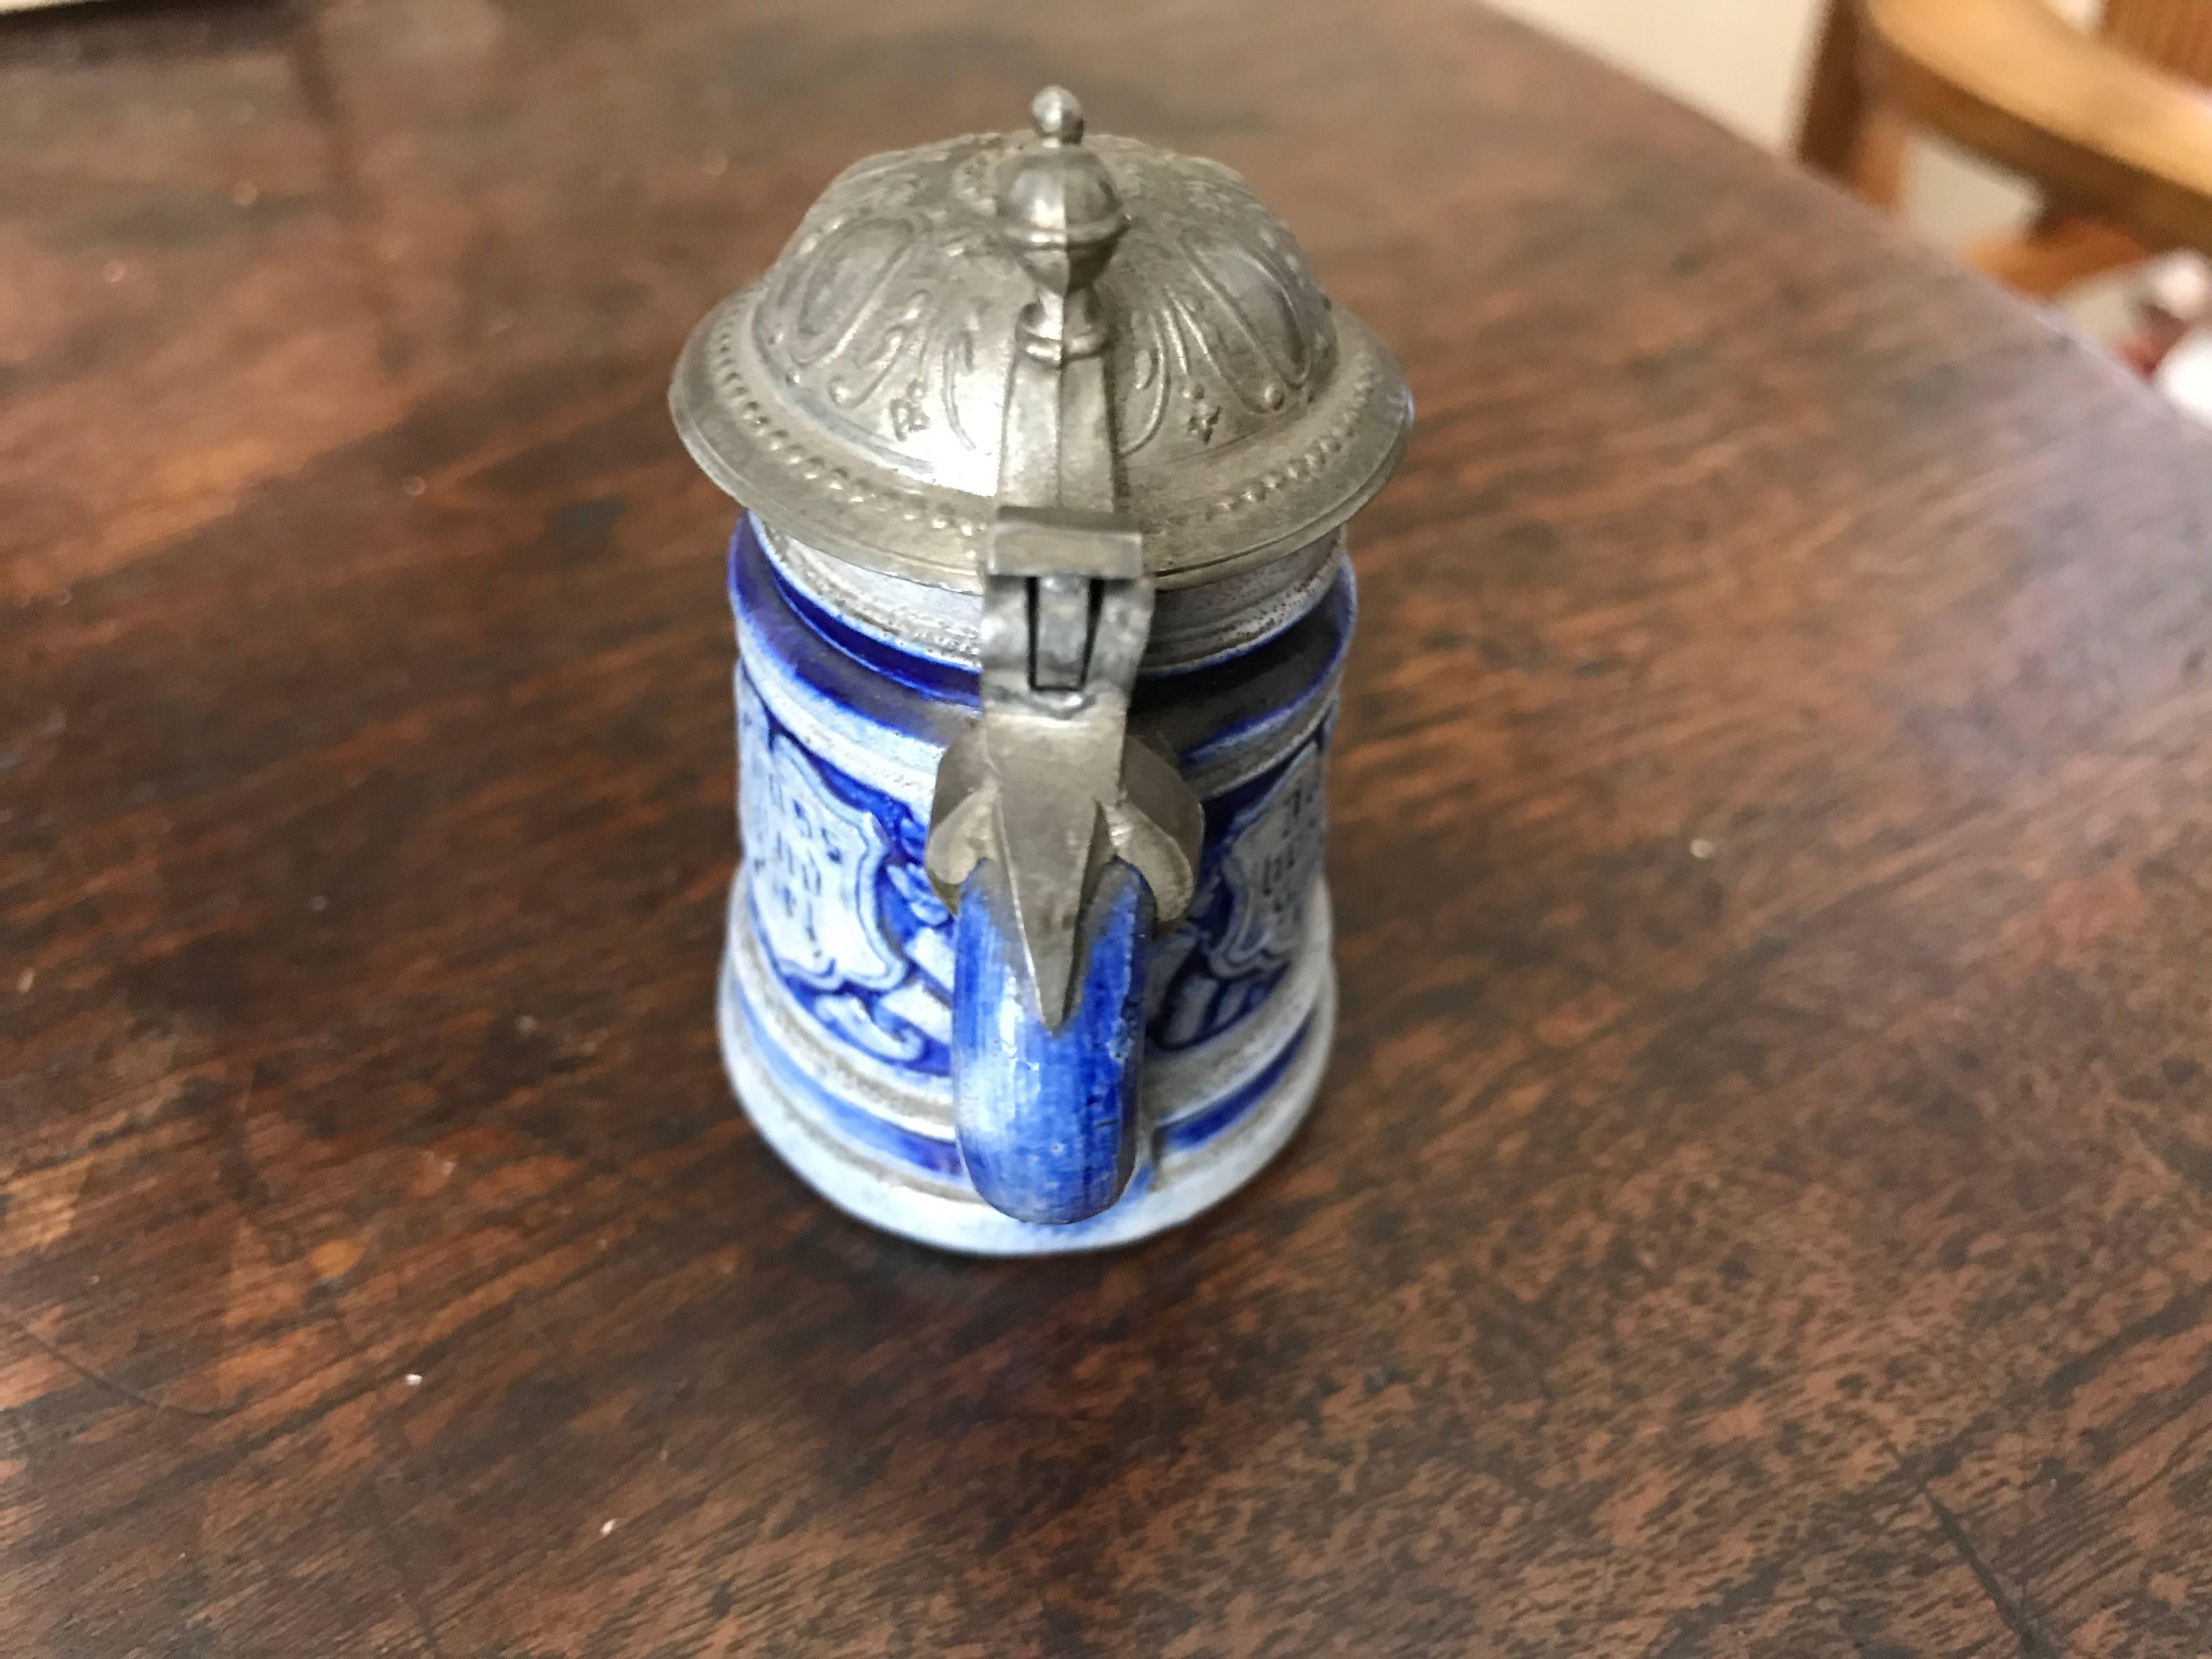 Vintage miniature glazed stonewear German beer stein in the blue and gray 'Westerwald' style. With pewter hinged lid. The German saying 